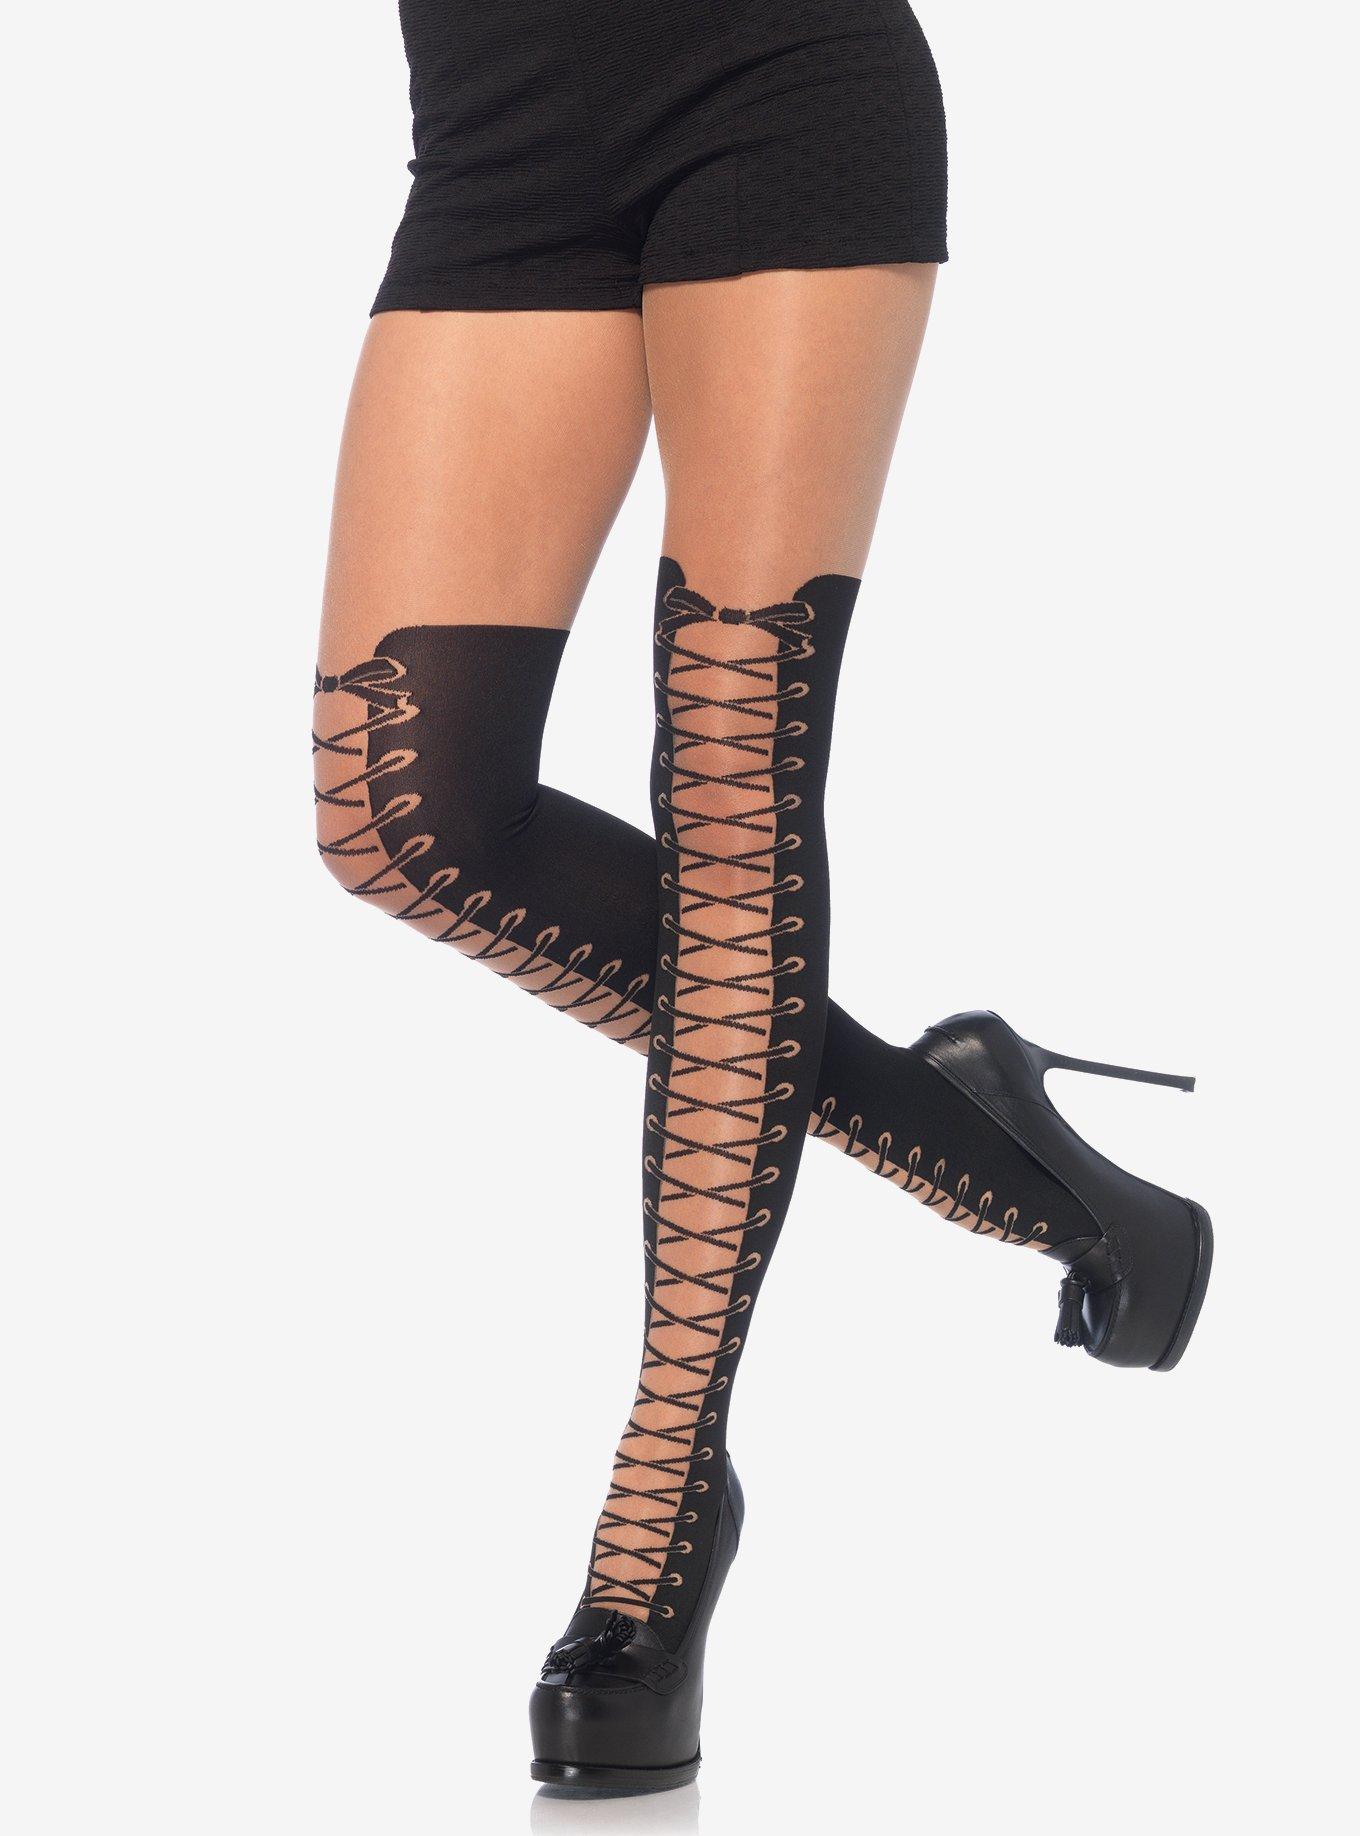 All Tied Up Tights With Faux Thigh High Boot Detail, , hi-res